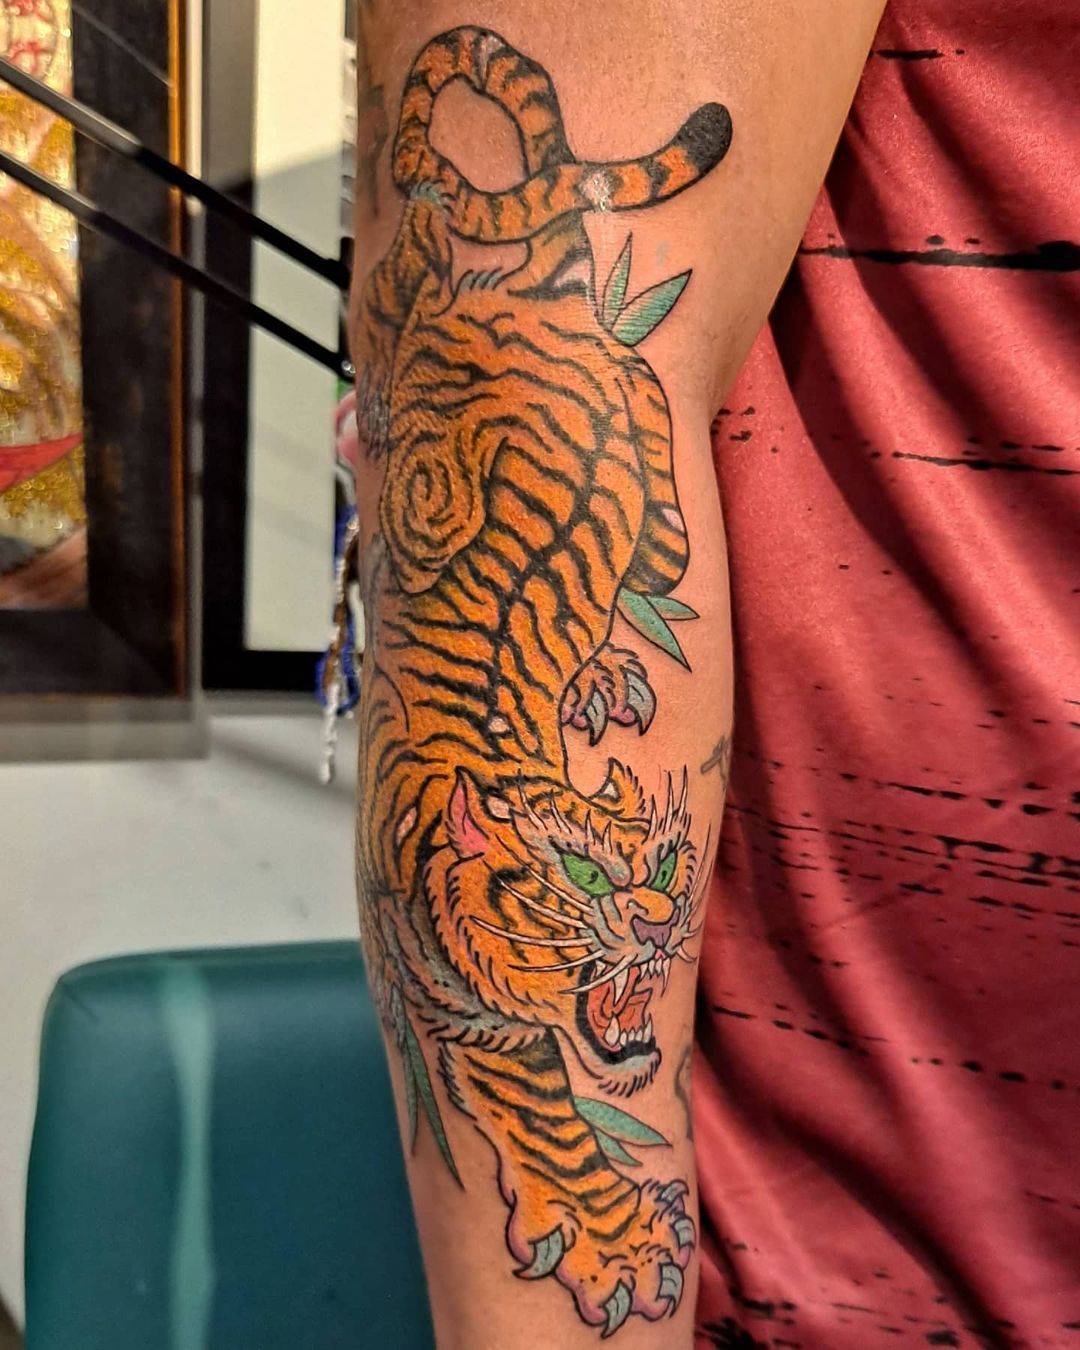 Tiger and snake by Yonmar - Electric Ave in Montreal, Quebec, Canada : r/ tattoos